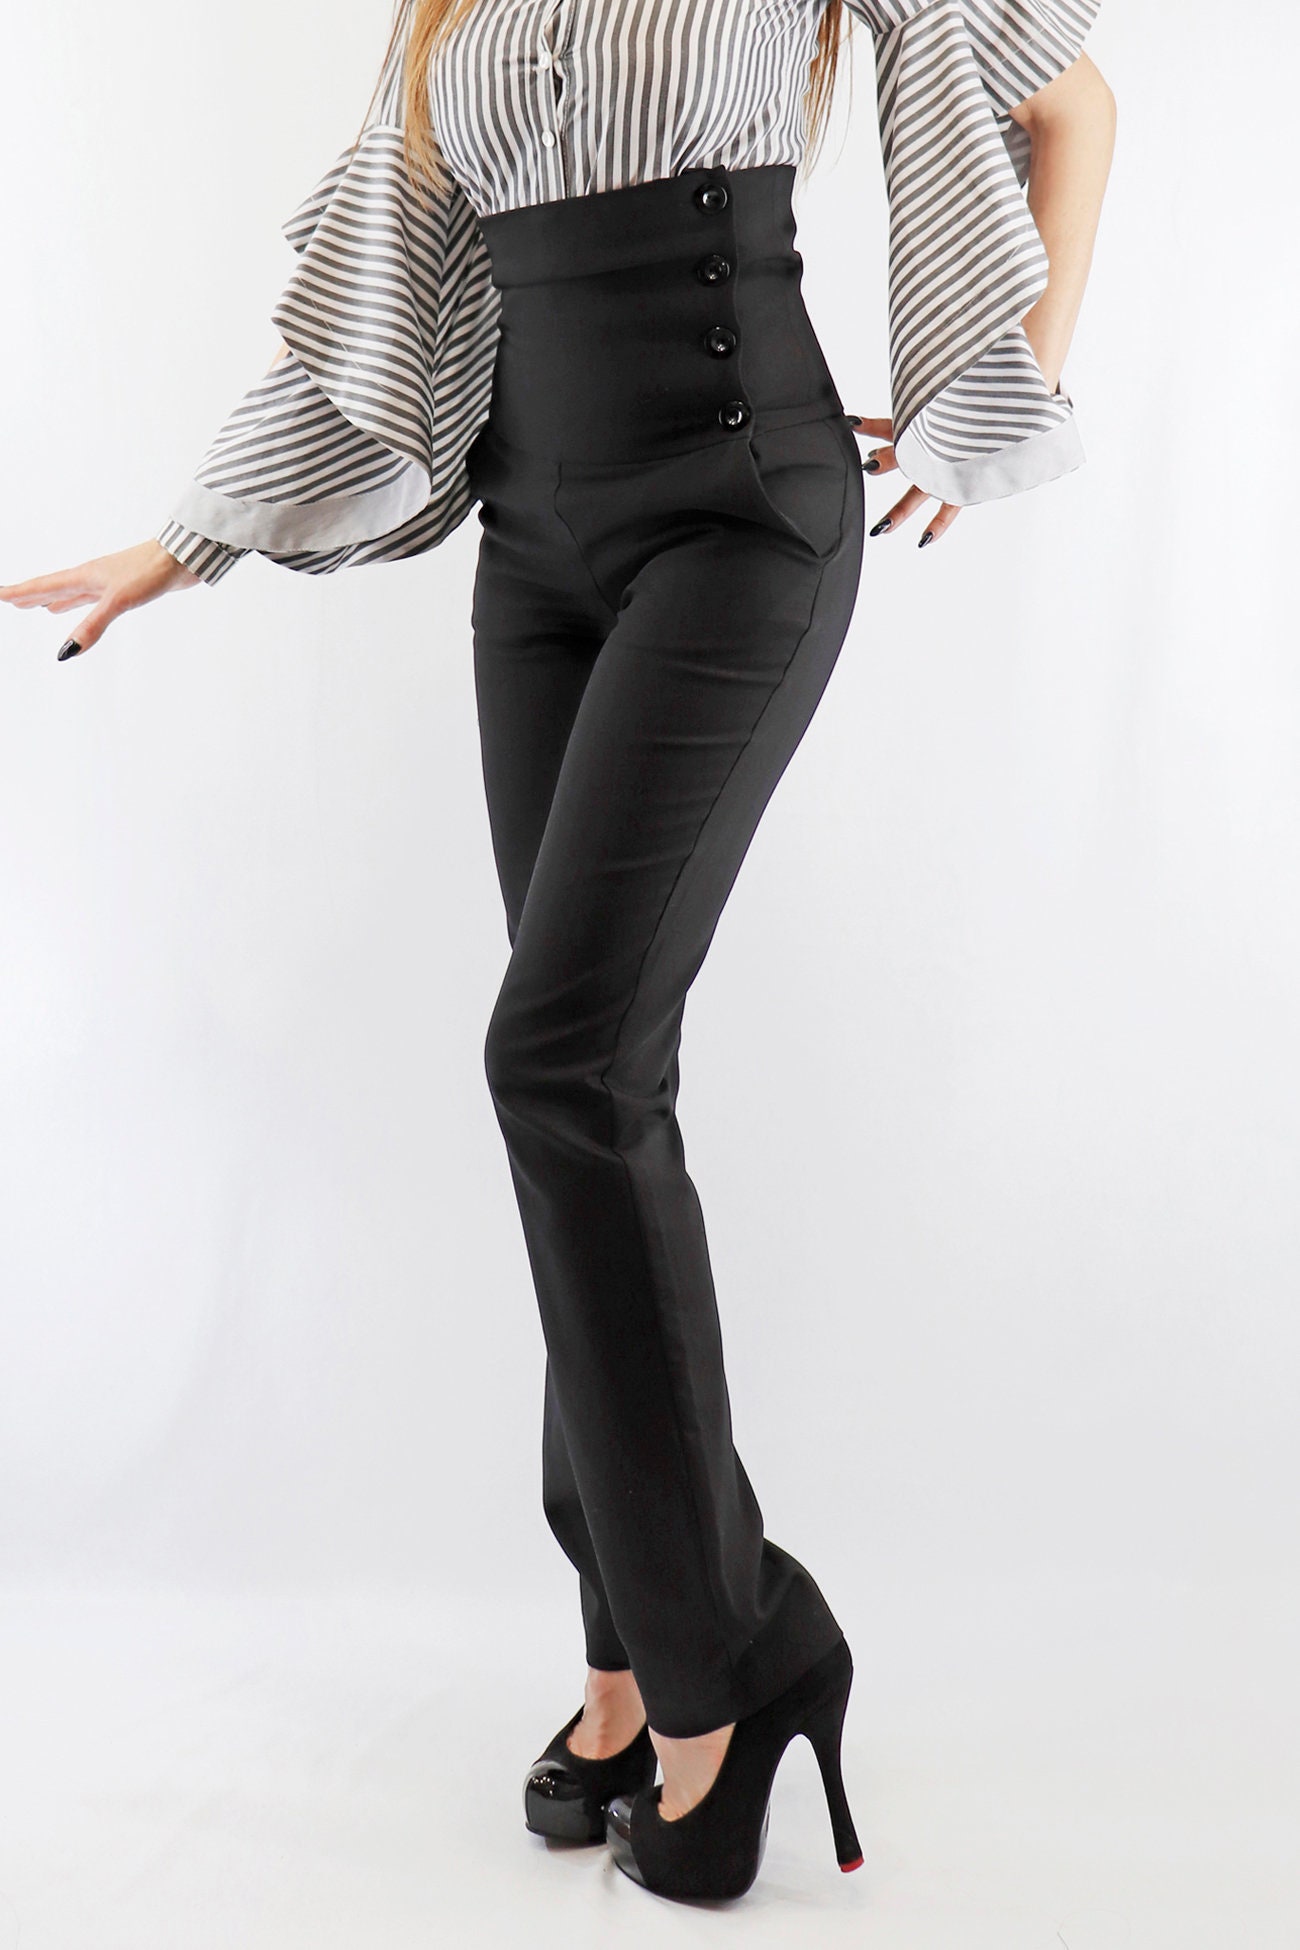 Stretch High Waist Trousers, Corset Type Pants Just Below the Bust